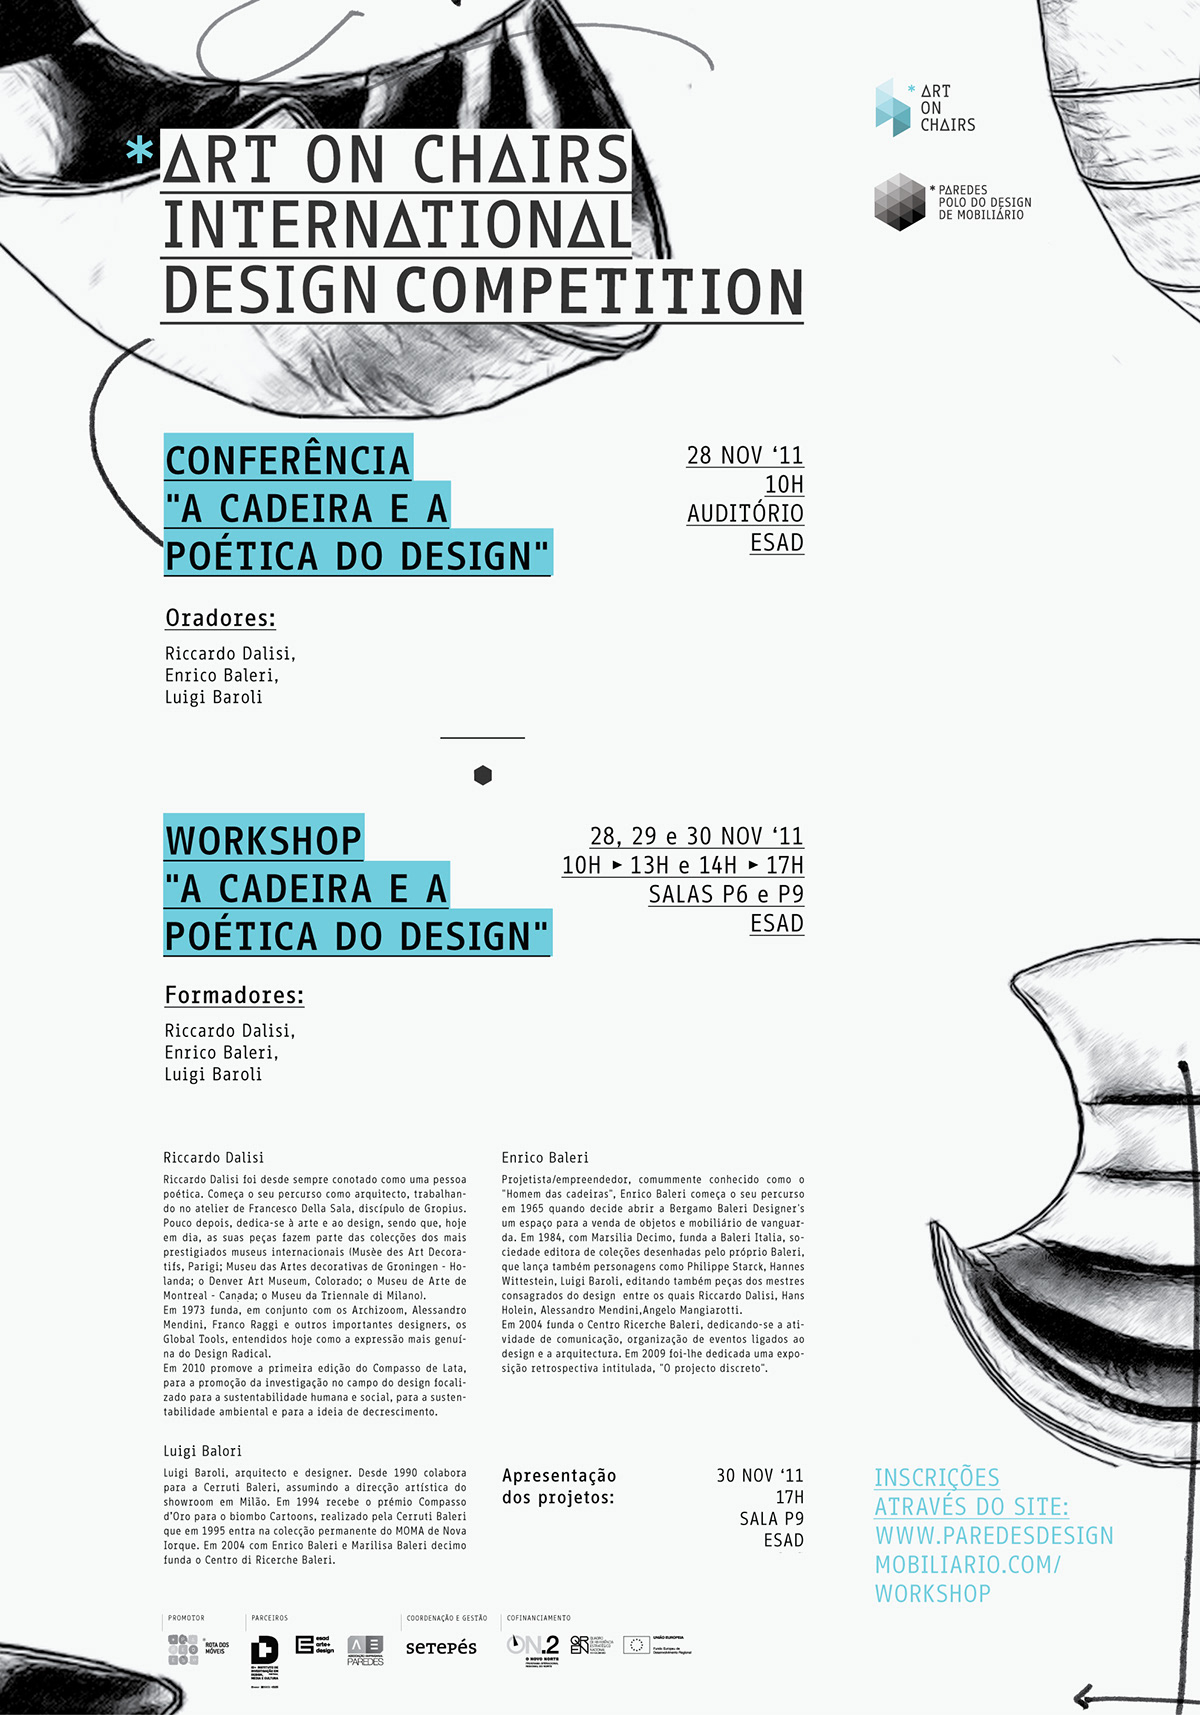 Art on Chairs Internacional Design Competition